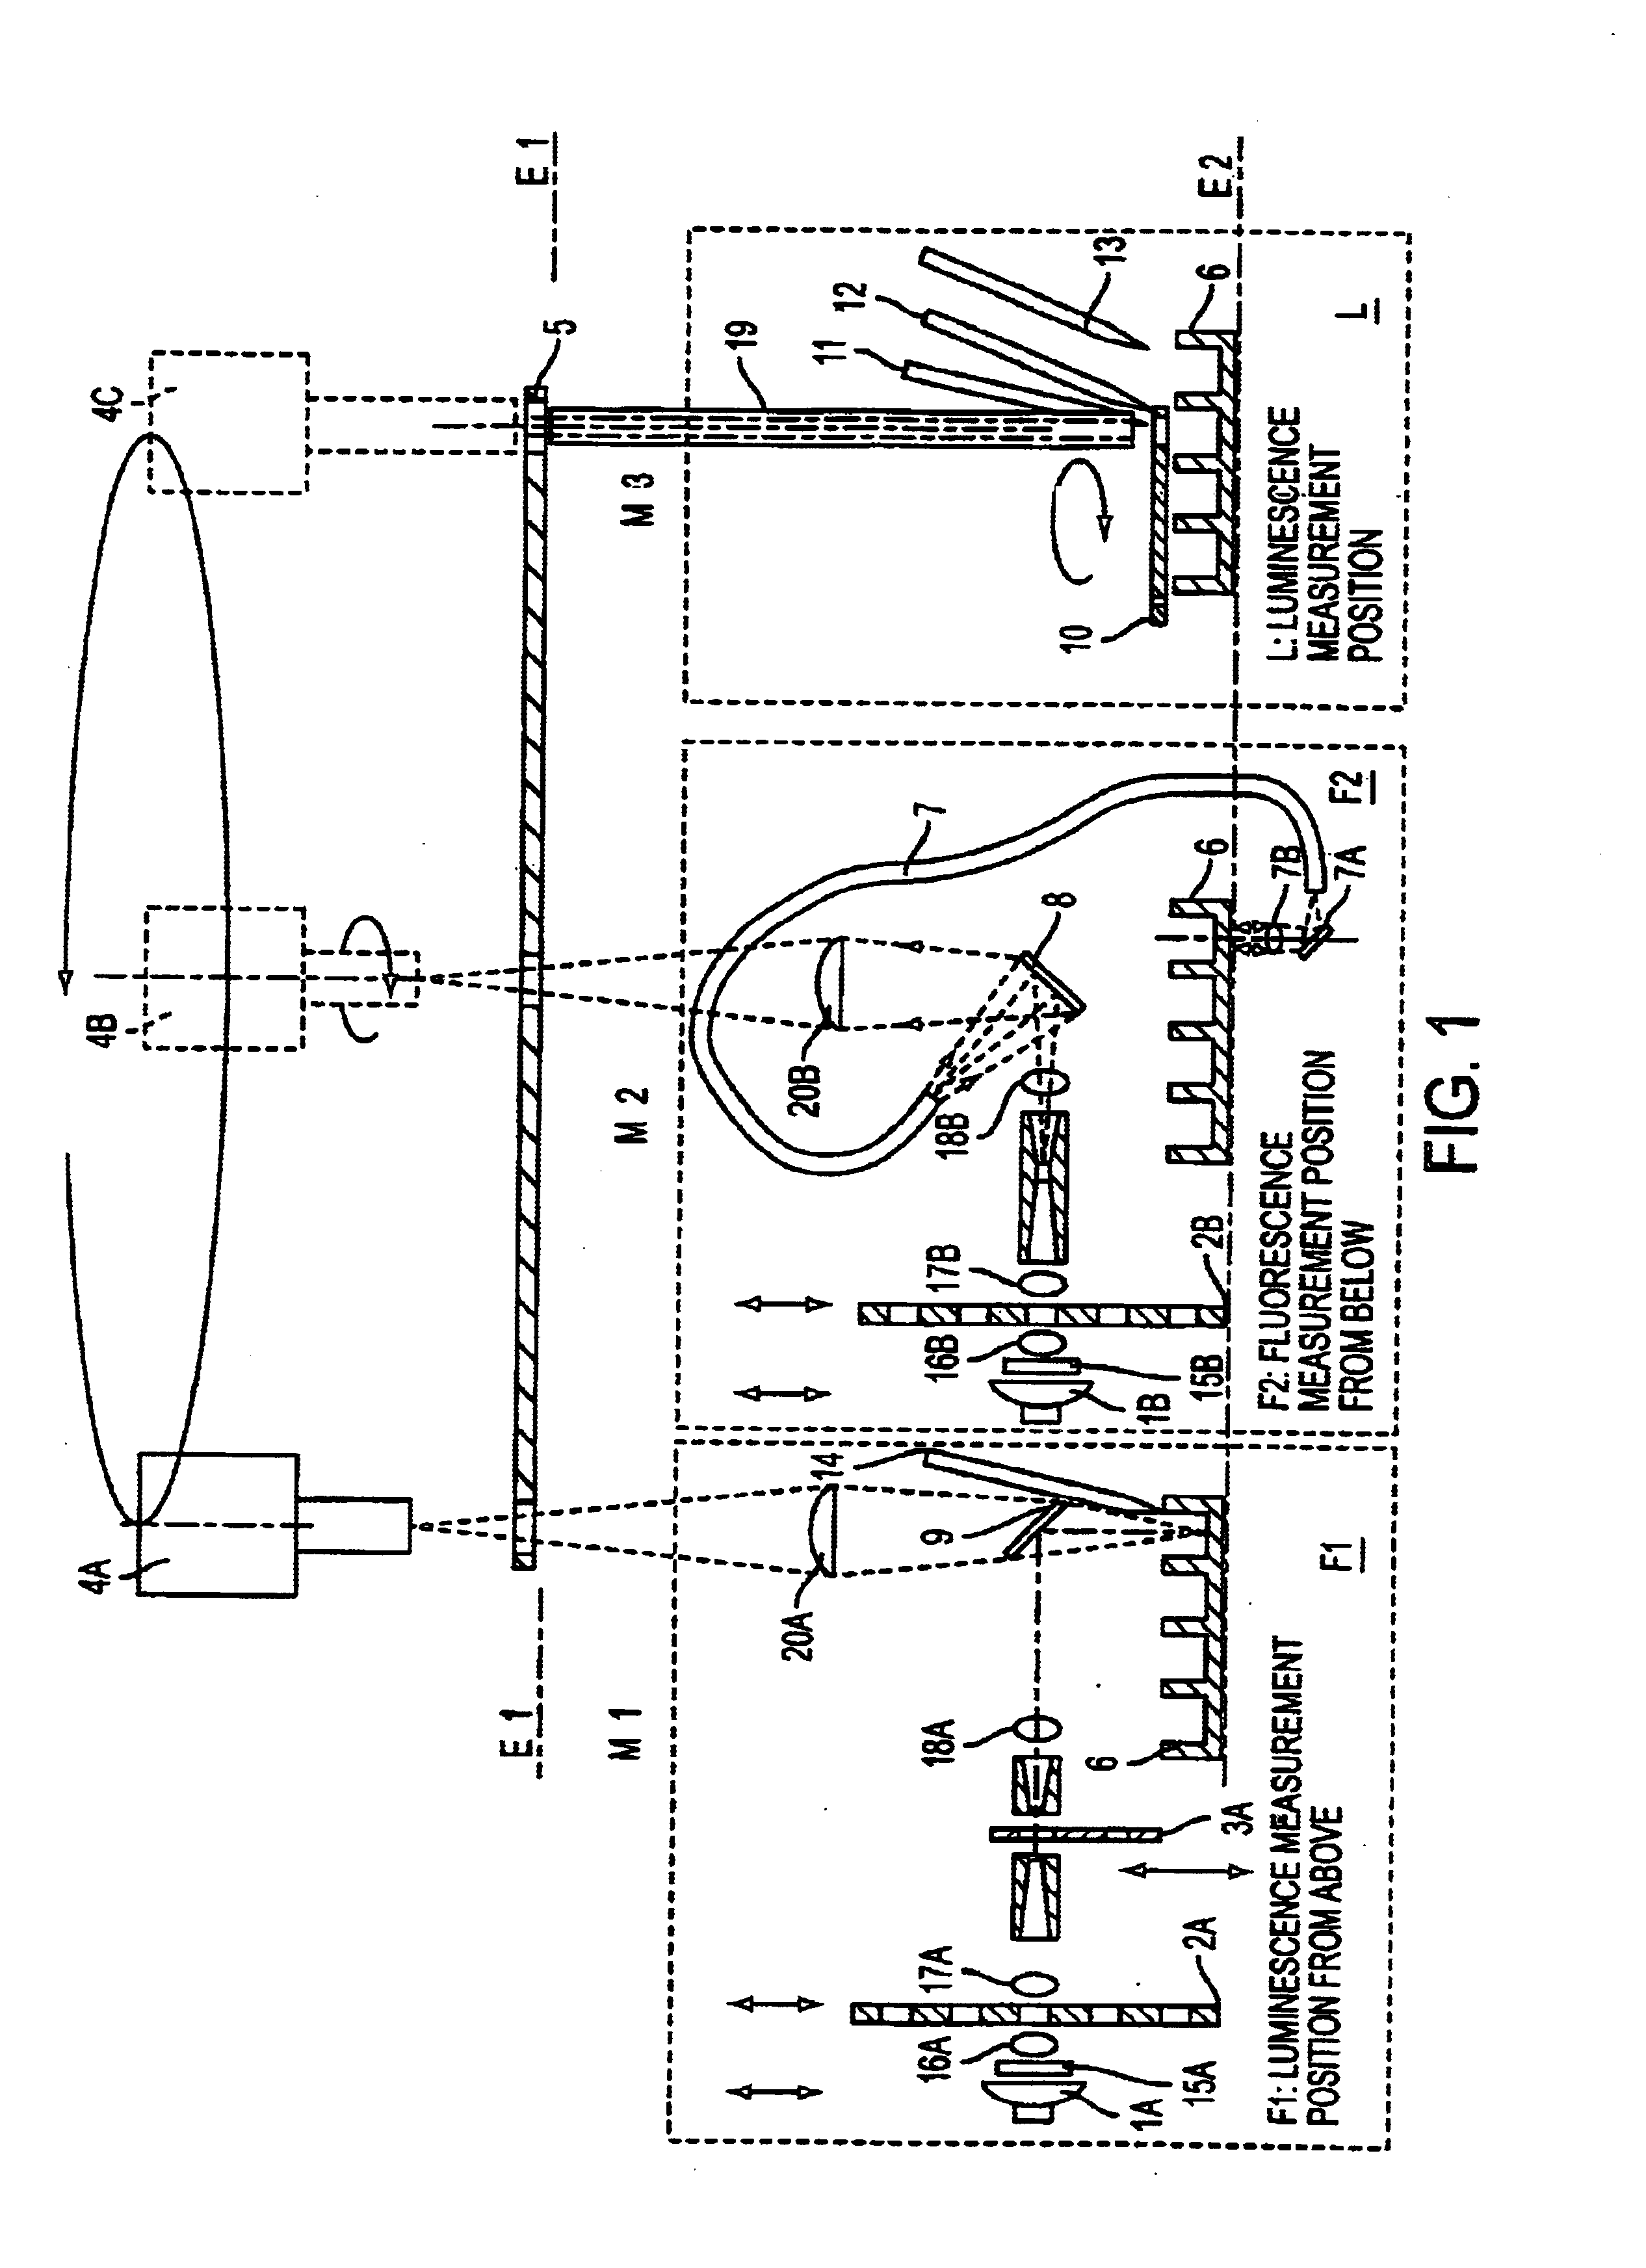 Apparatus for measuring in particular luminescent and/or fluorescent radiation